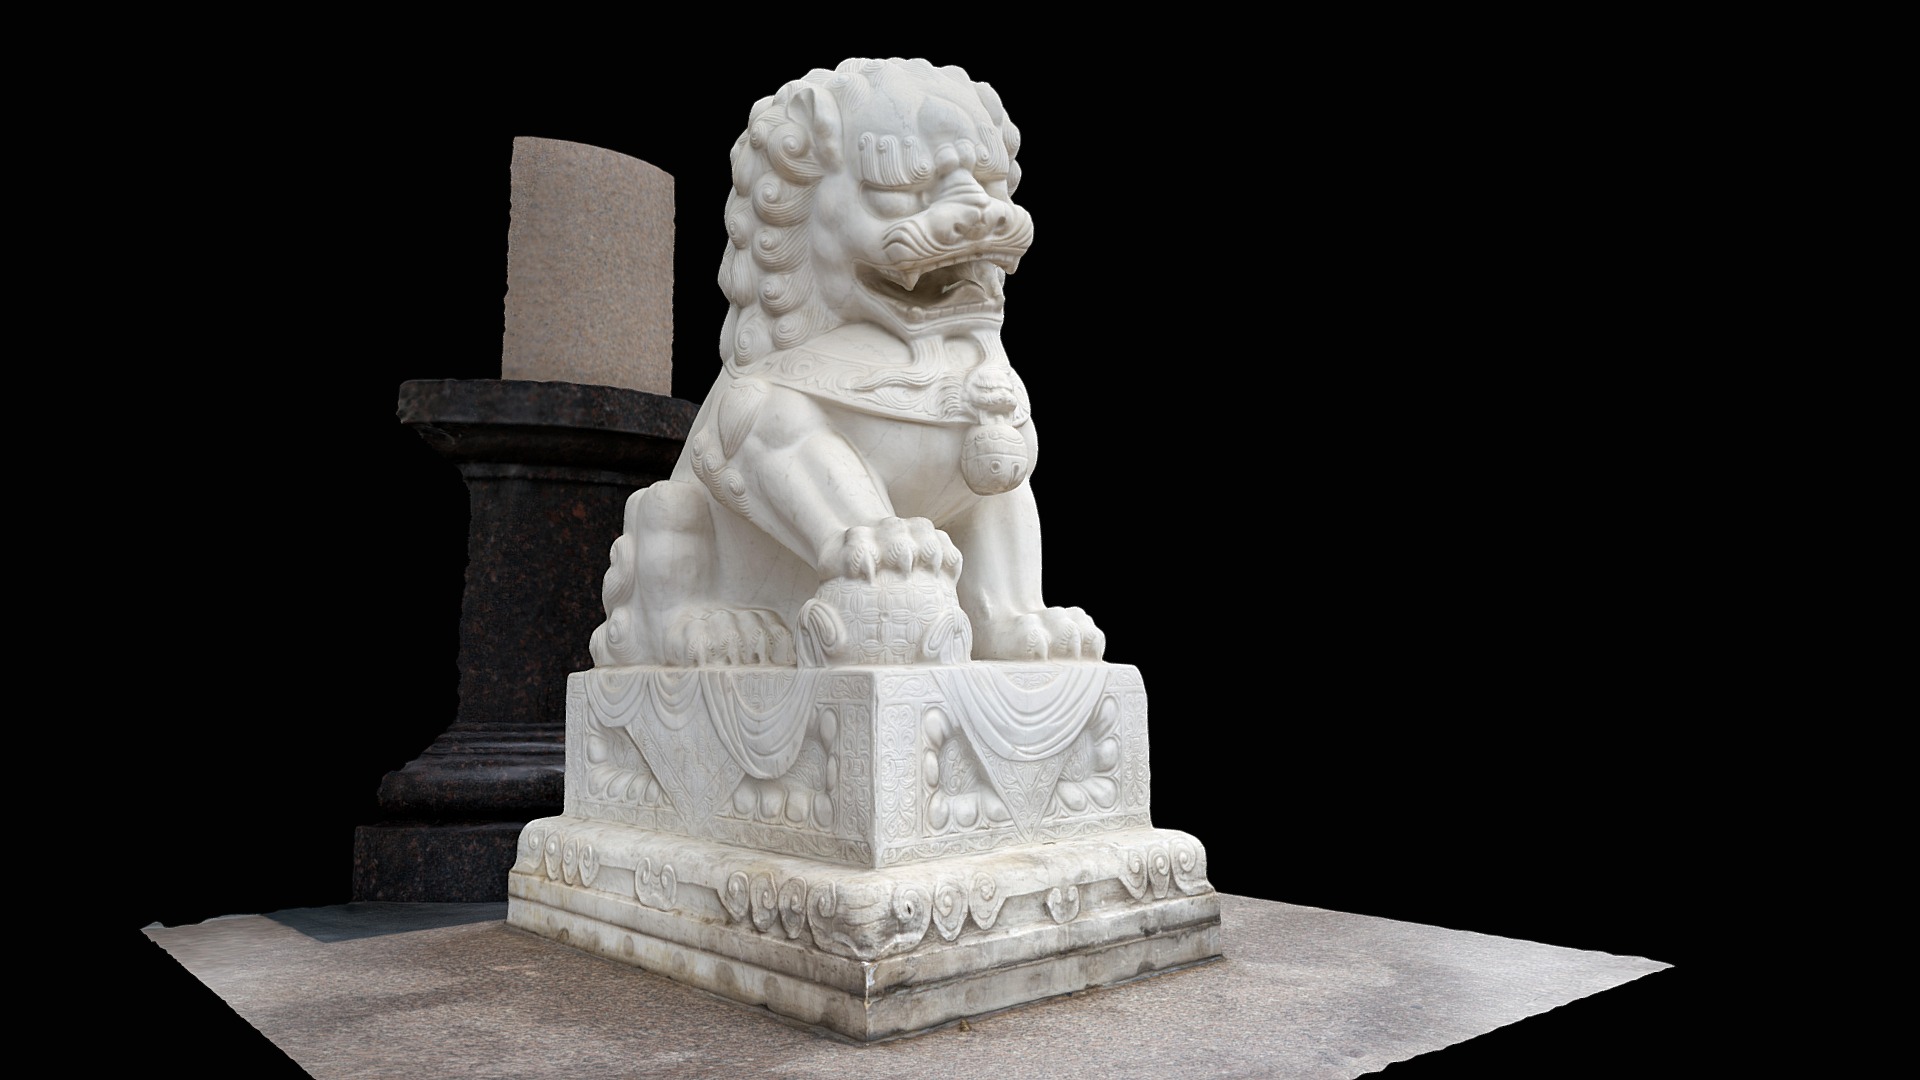 3D model 2018-09 – Beijing 36 - This is a 3D model of the 2018-09 - Beijing 36. The 3D model is about a statue of a lion.